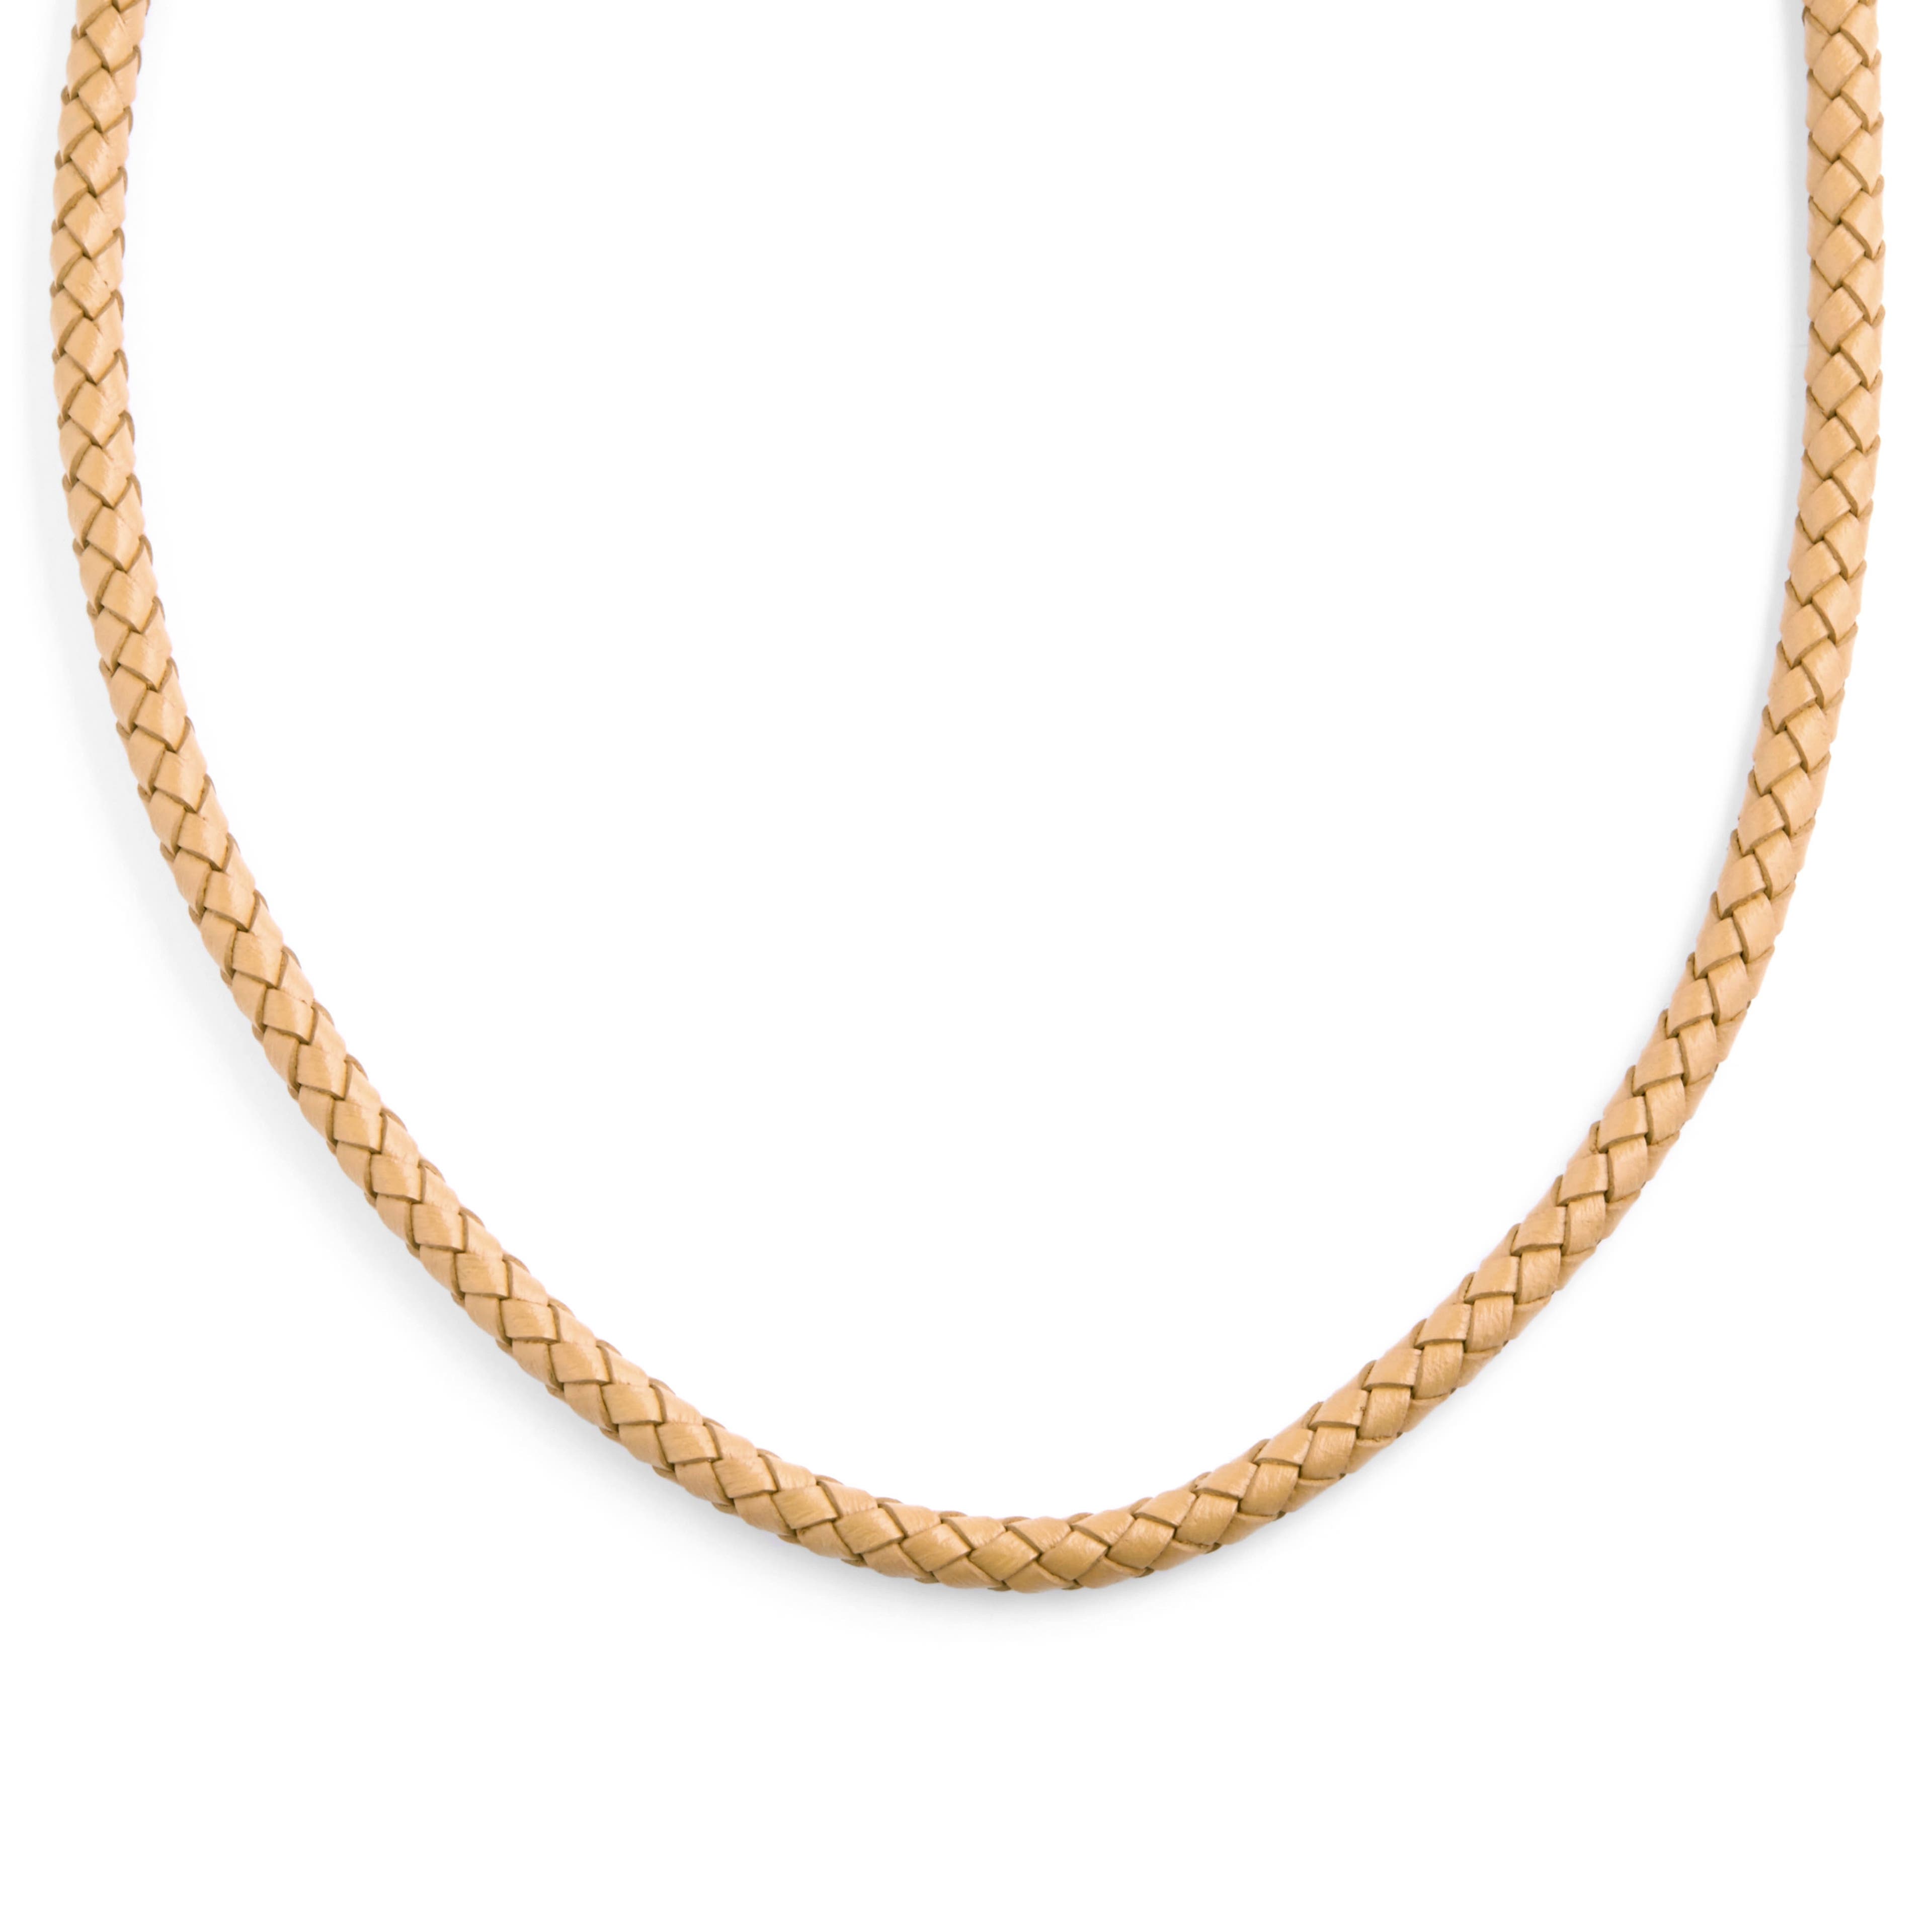 Tenvis | 1/5" (5 mm) Sand Leather Necklace